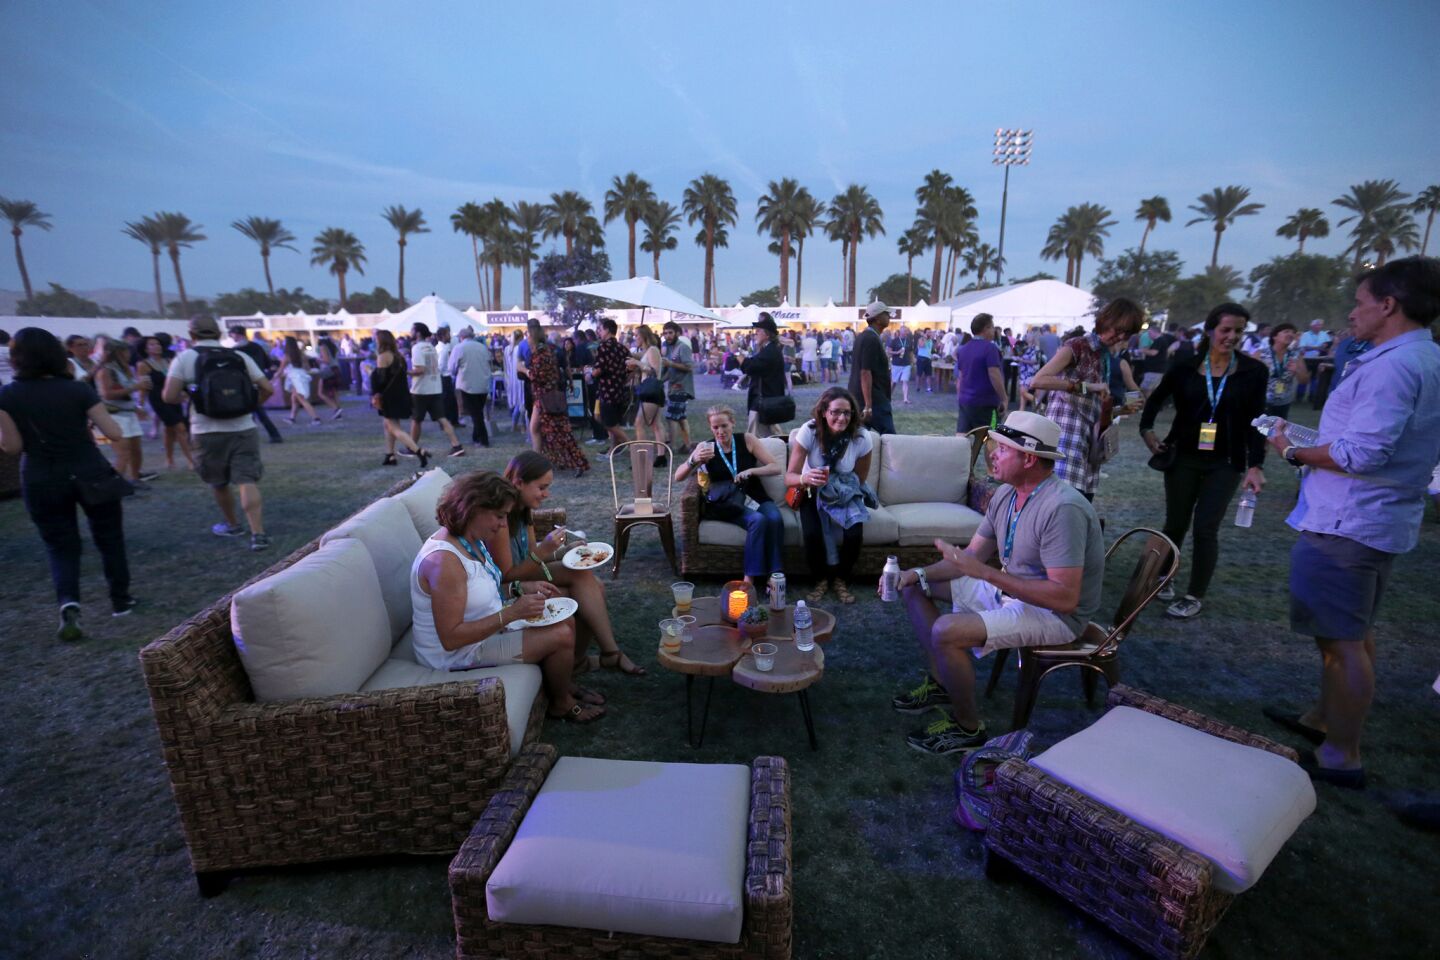 Concertgoers eat, drink and relax at dusk on the first day of the three-day Desert Trip at the Empire Polo Club grounds in Indio.